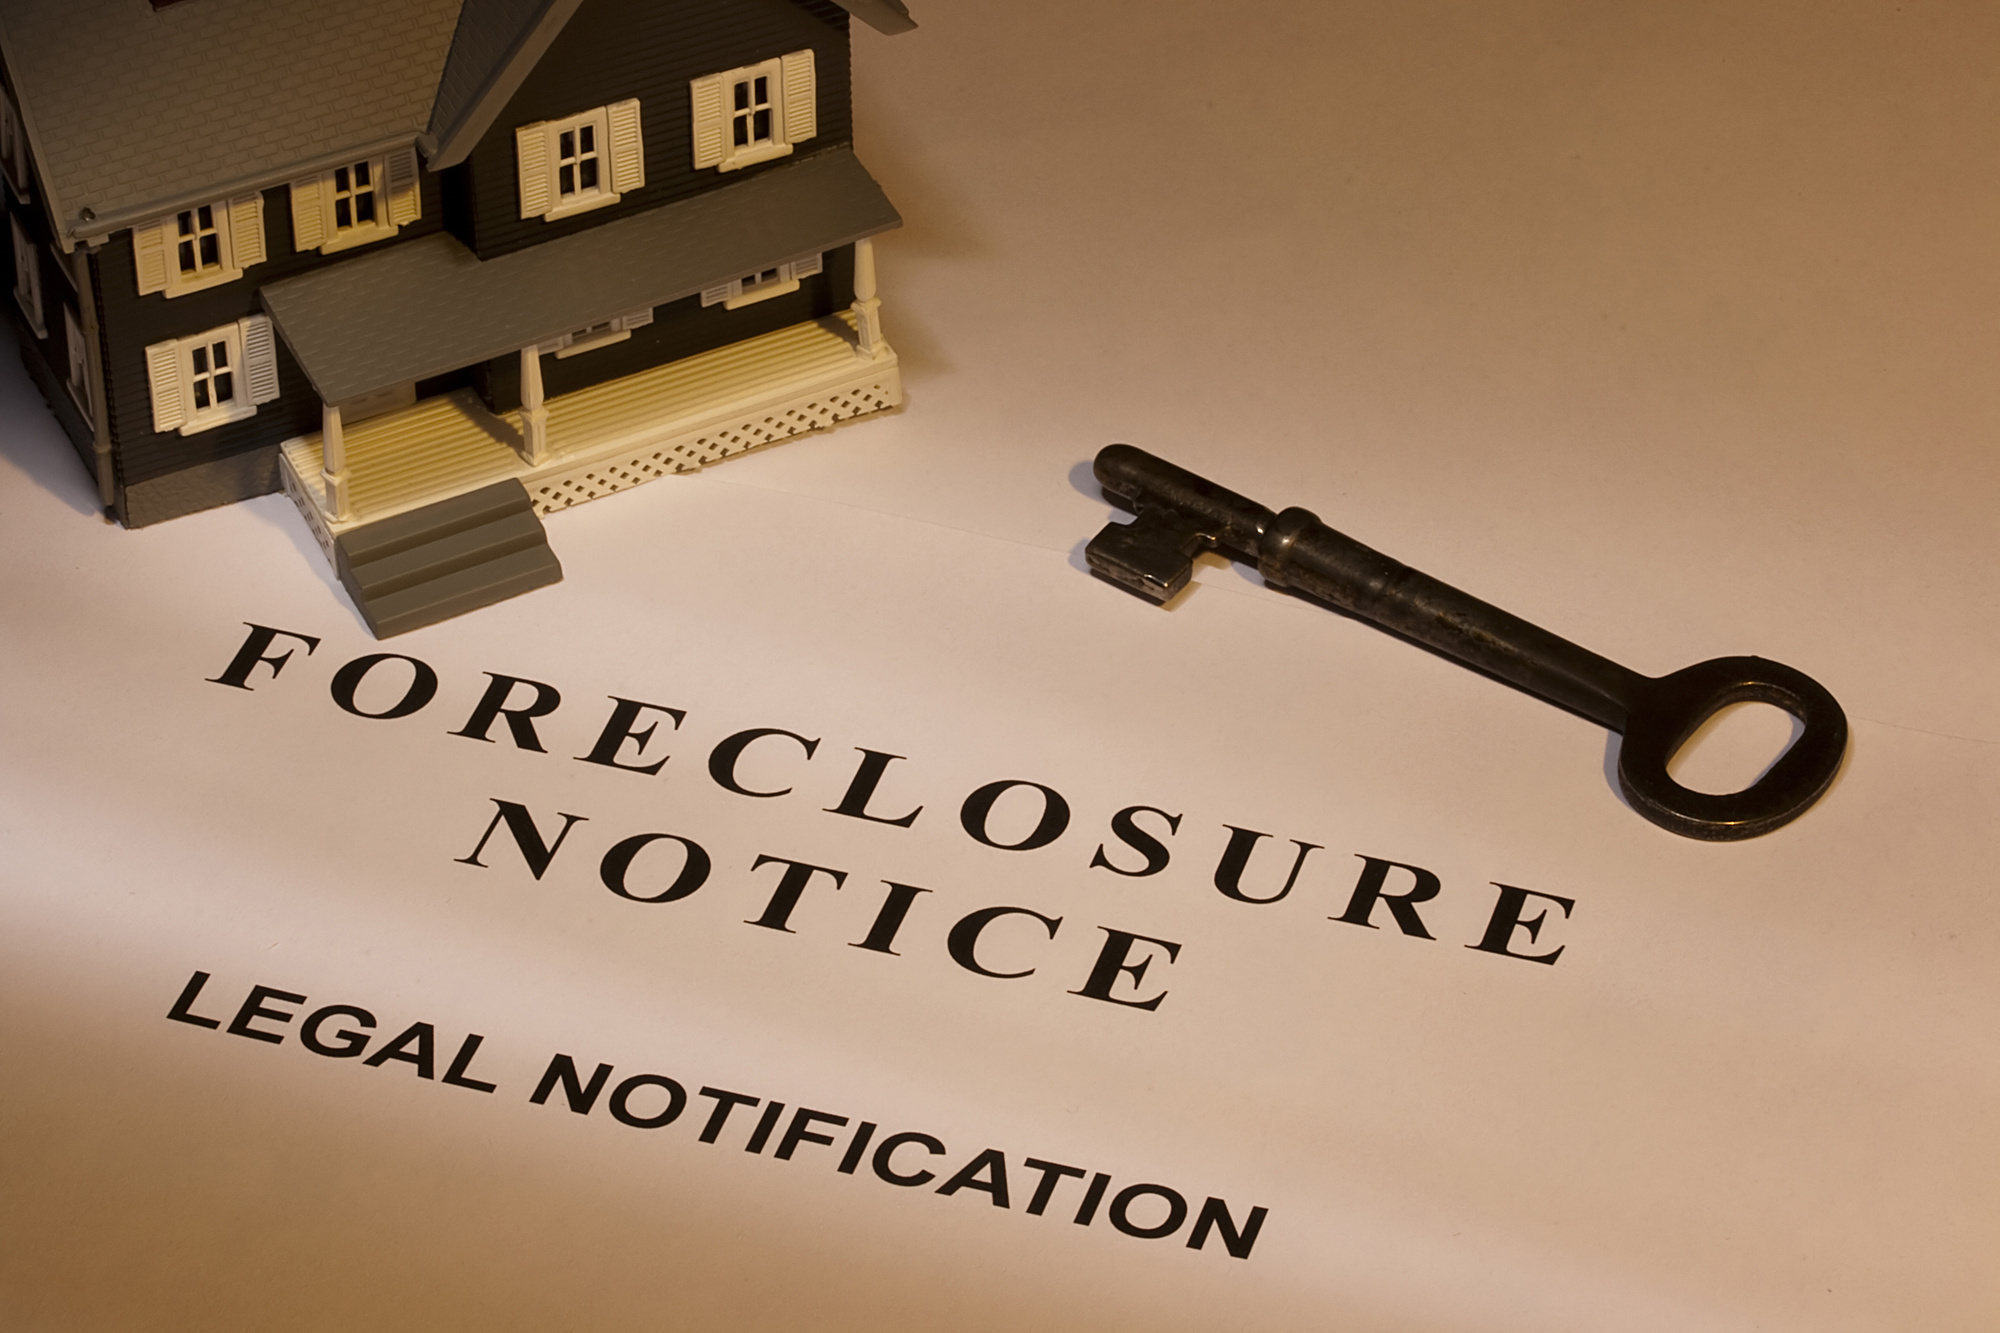 what is foreclosure